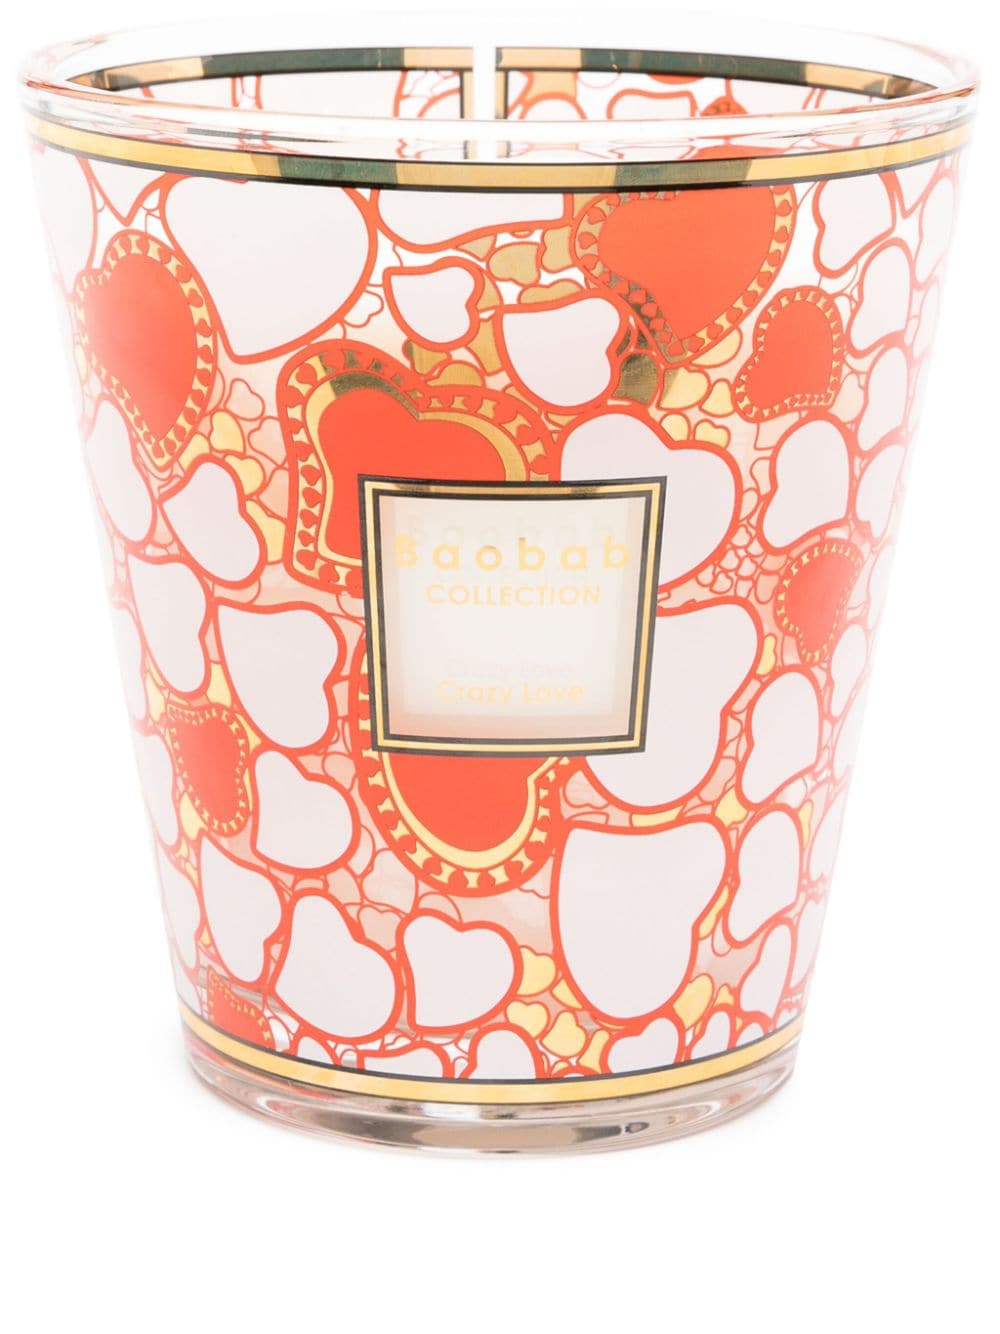 Baobab Collection Crazy Love Max 16 scented candle (1.1kg) - Red